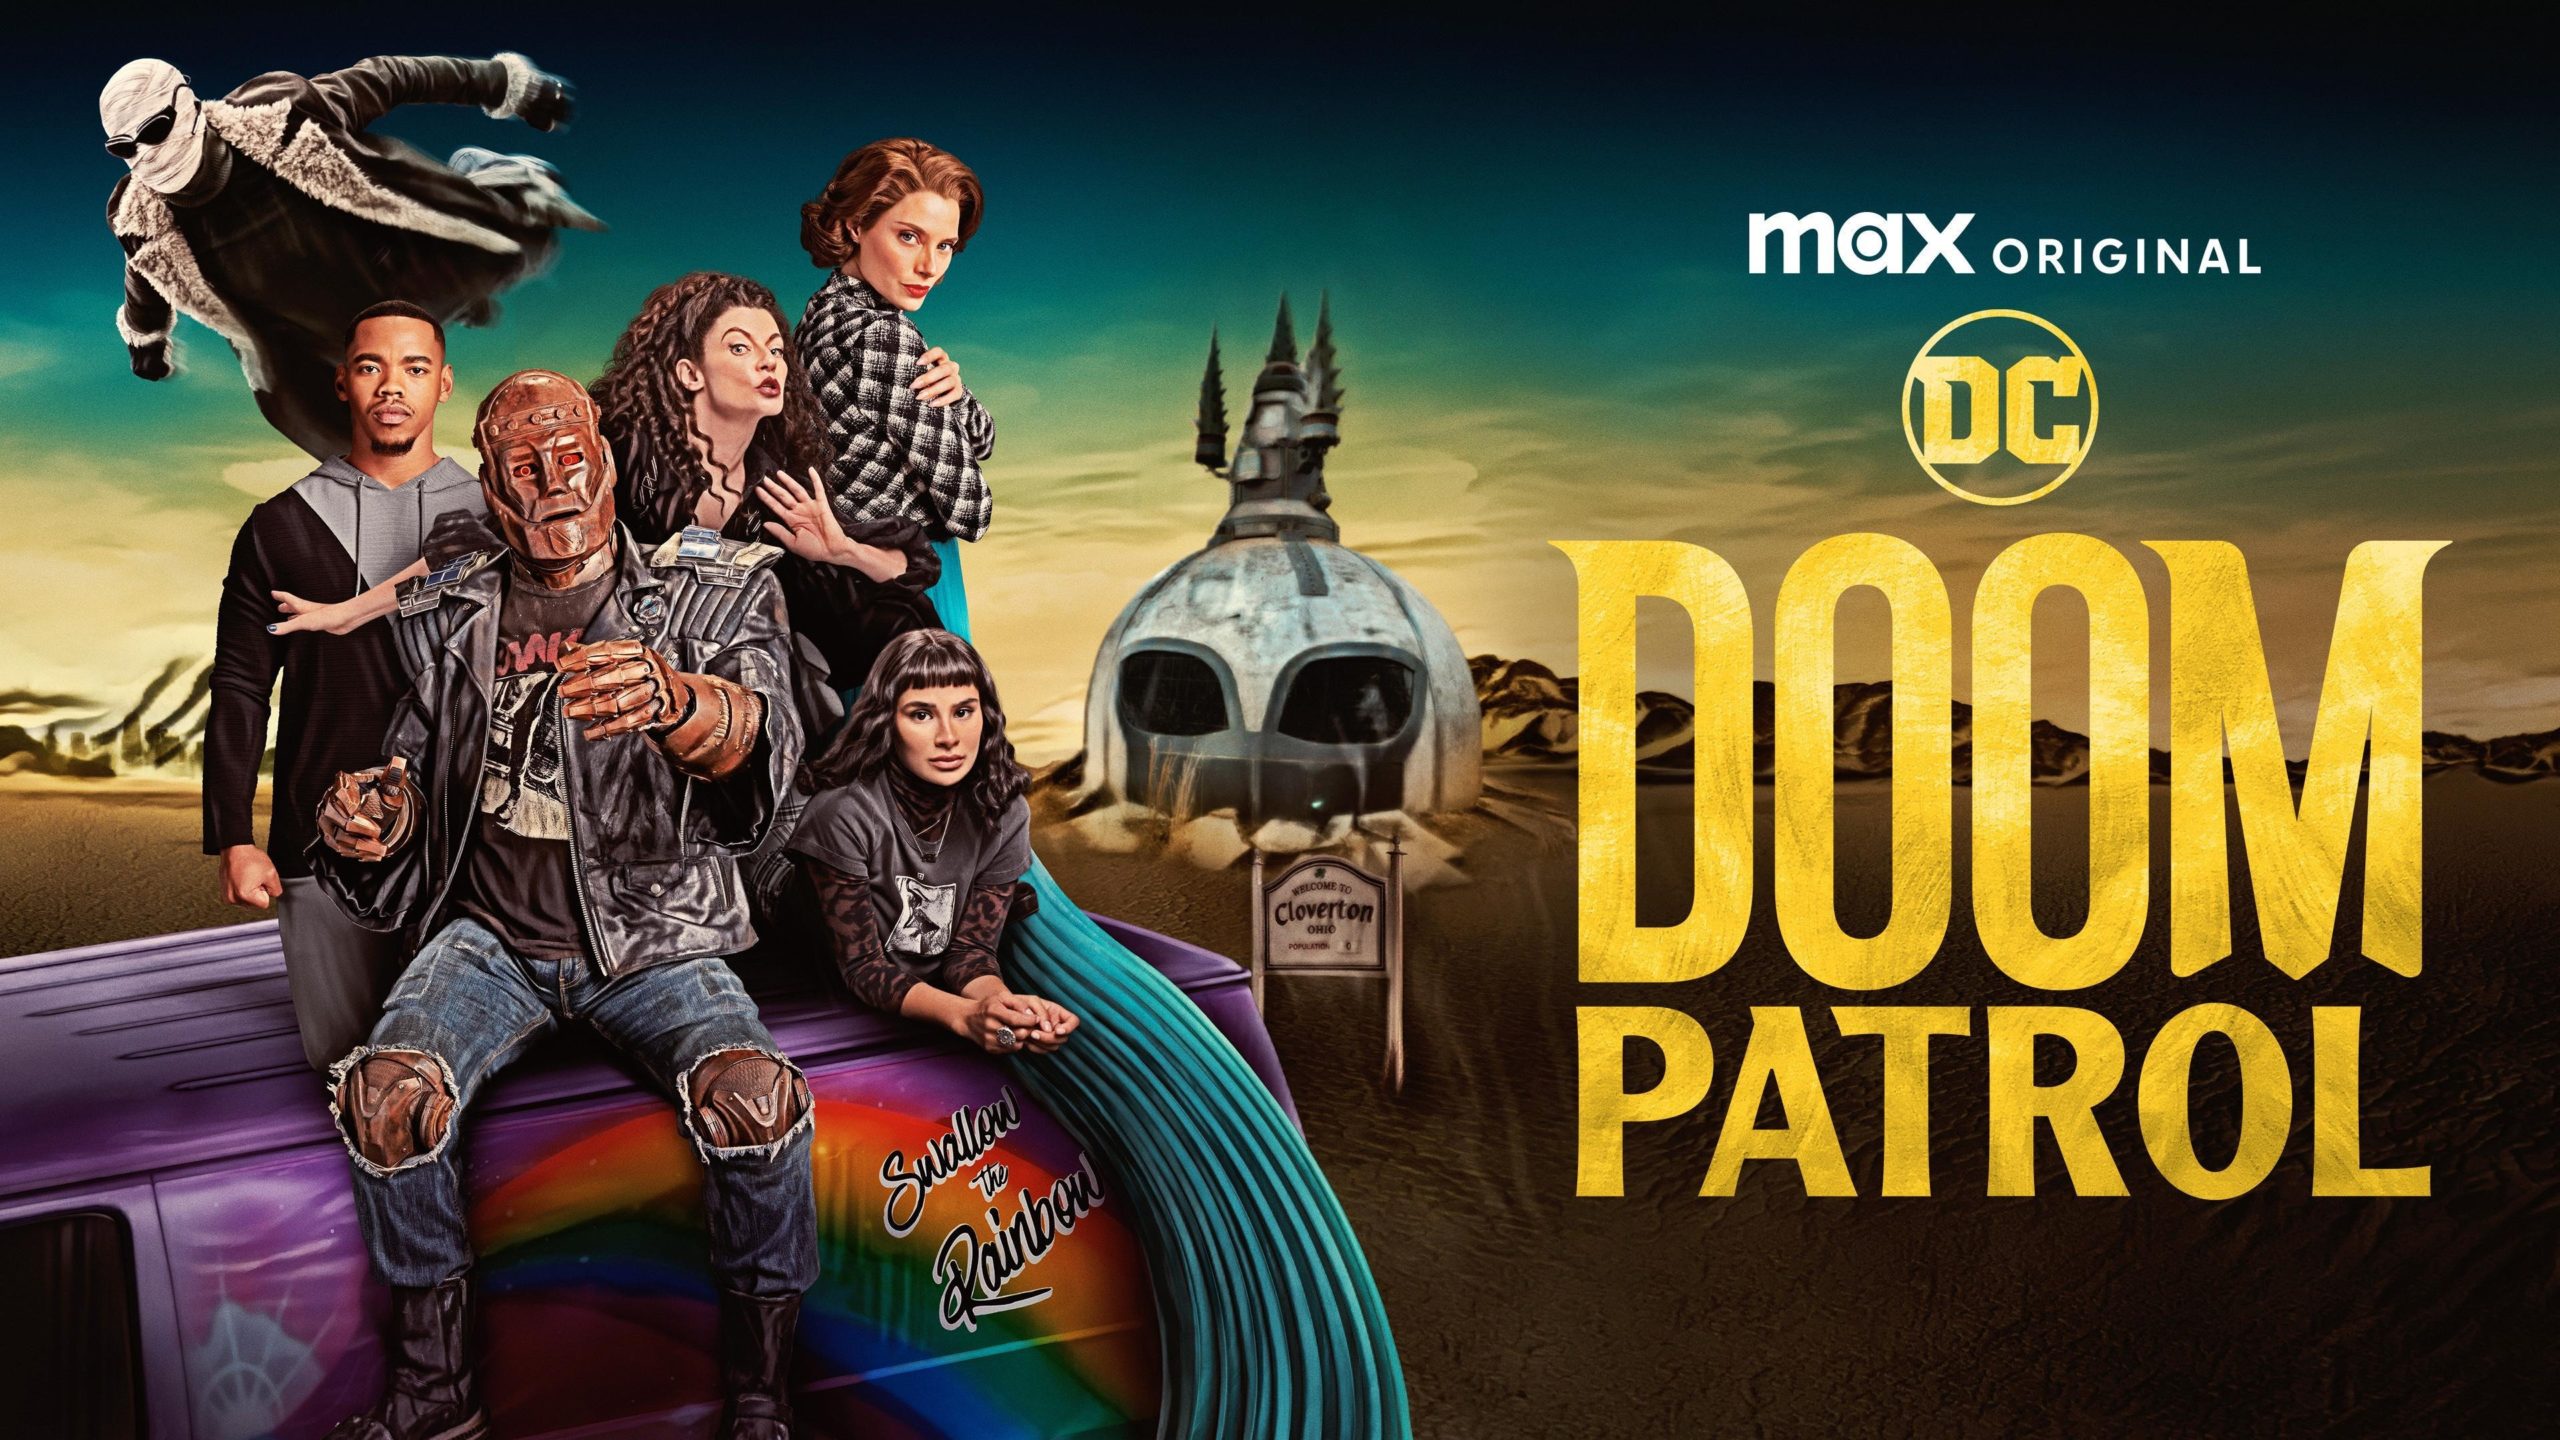 #Doom Patrol: Season Four; James Gunn Confirms Final Episodes of Cancelled Max Series Will Be Released